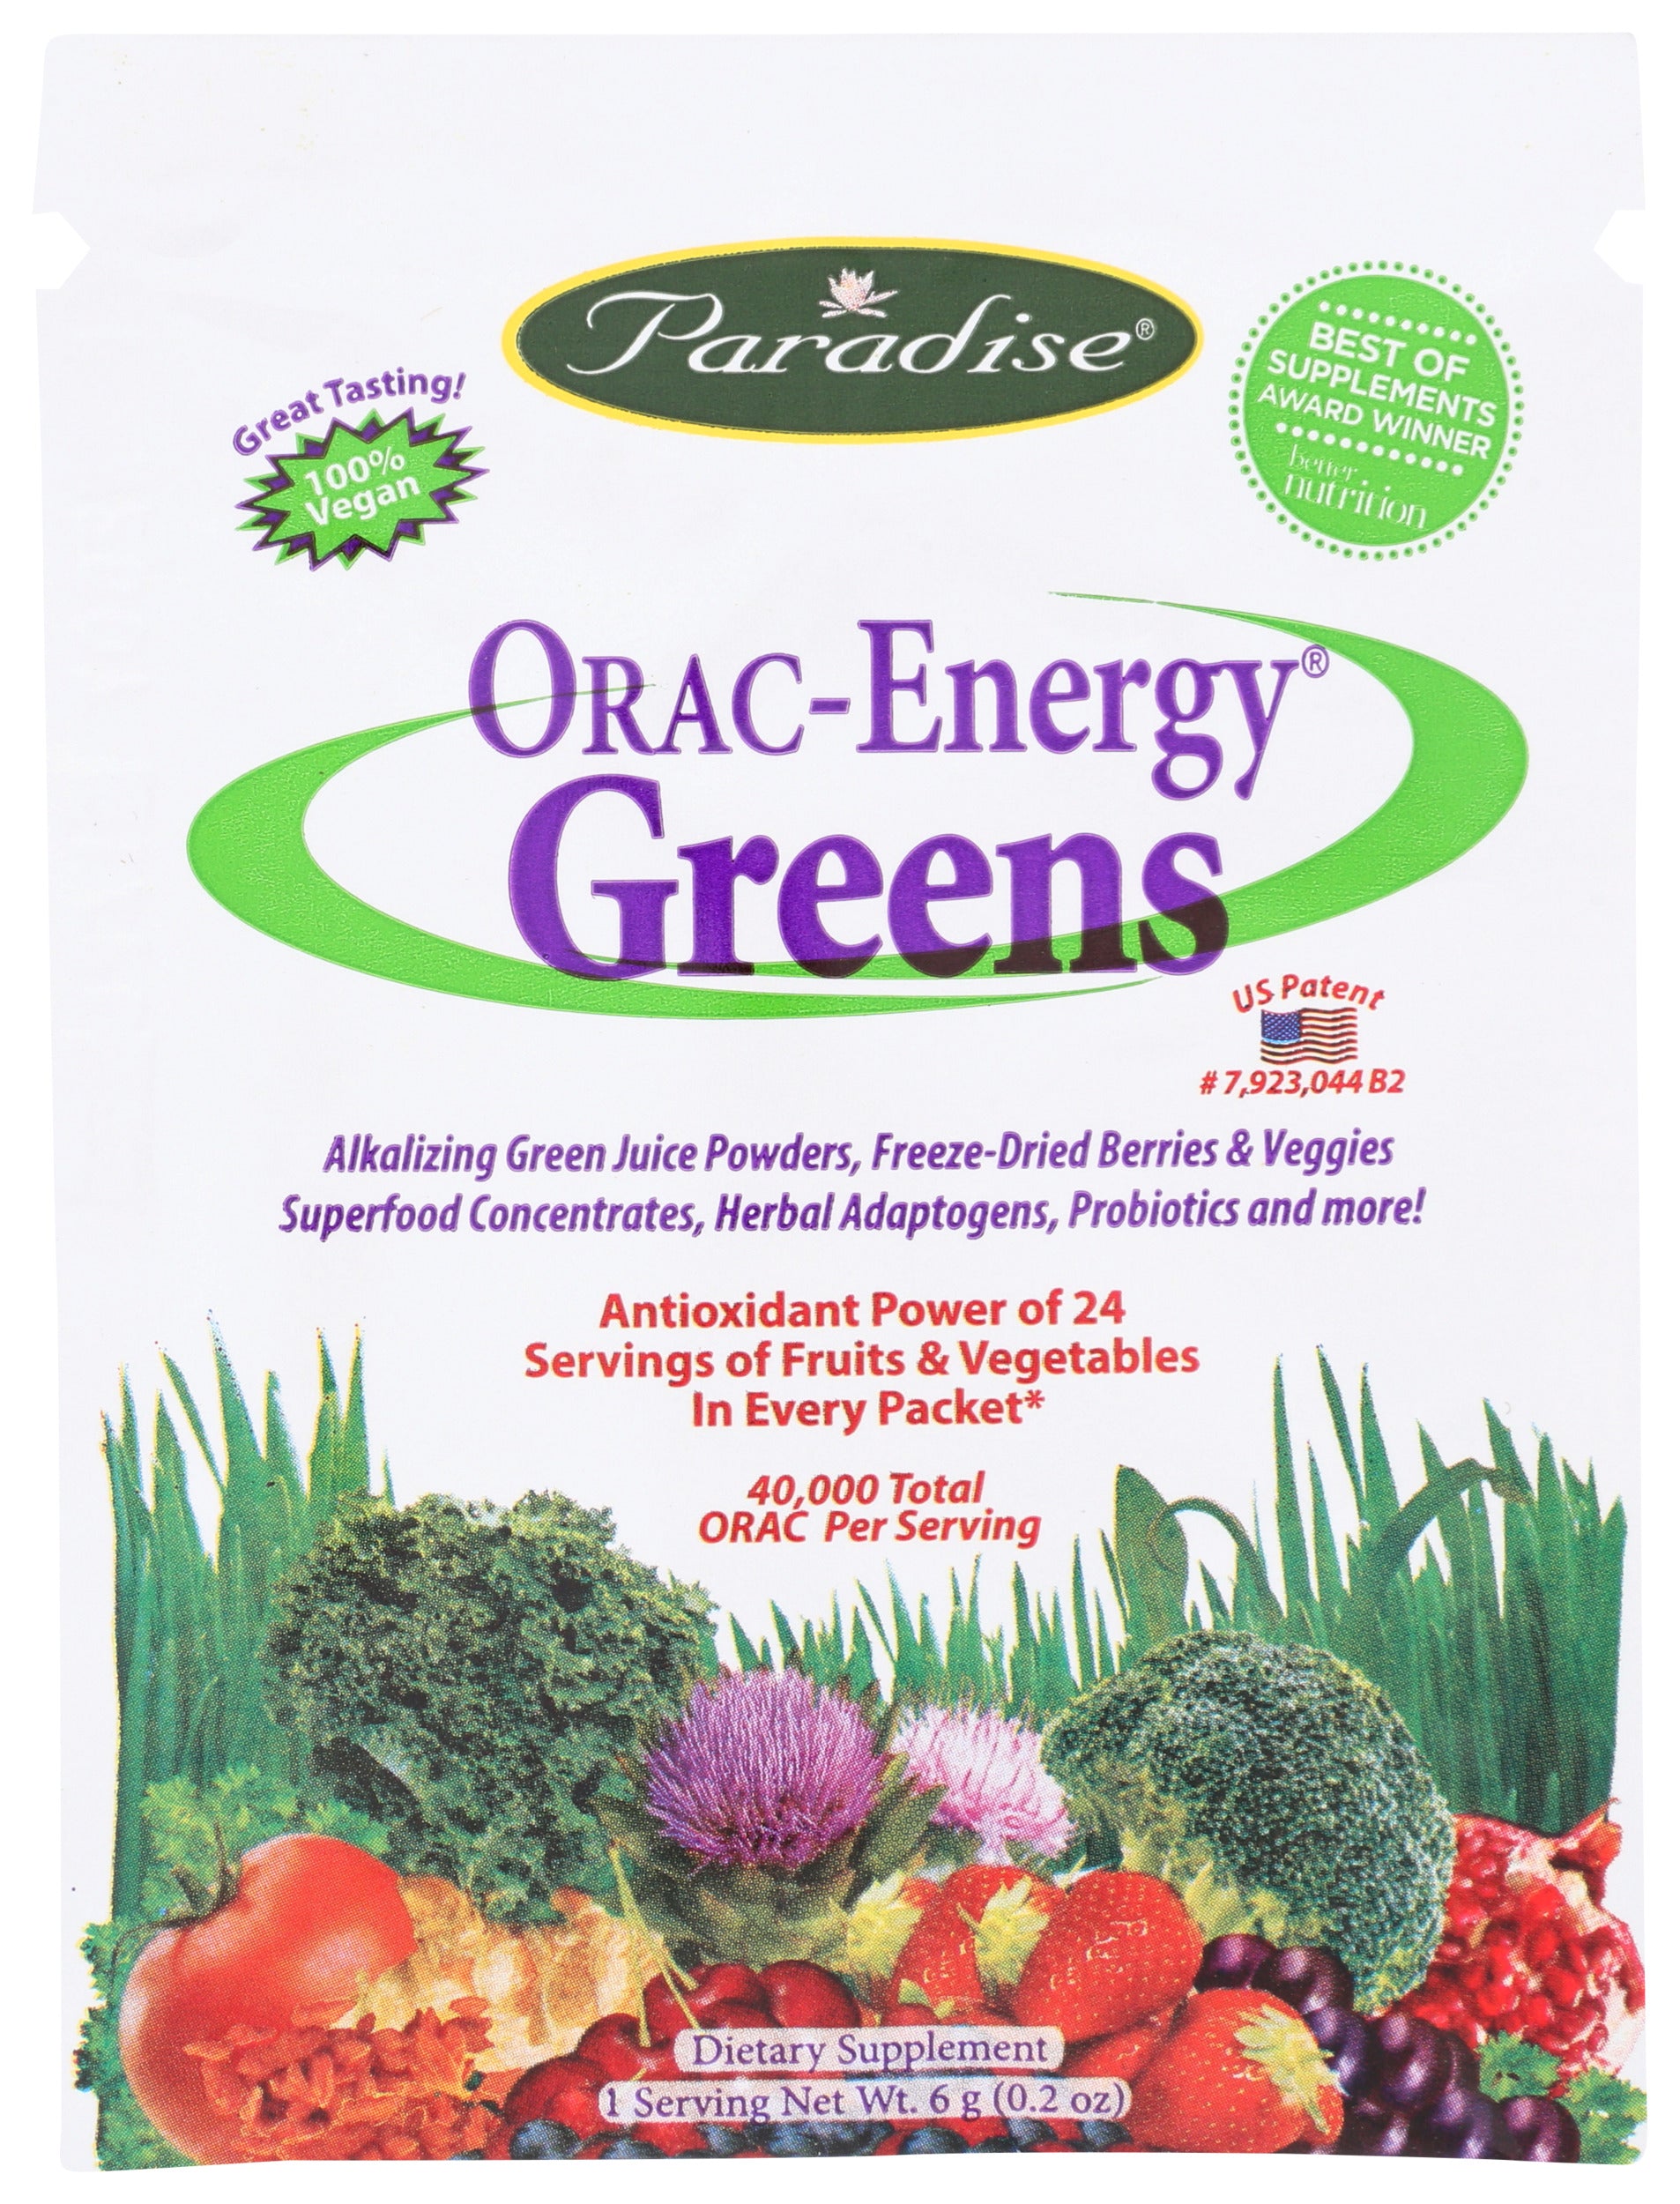 Paradise Orac Energy Greens 0.2oz Front of Packet